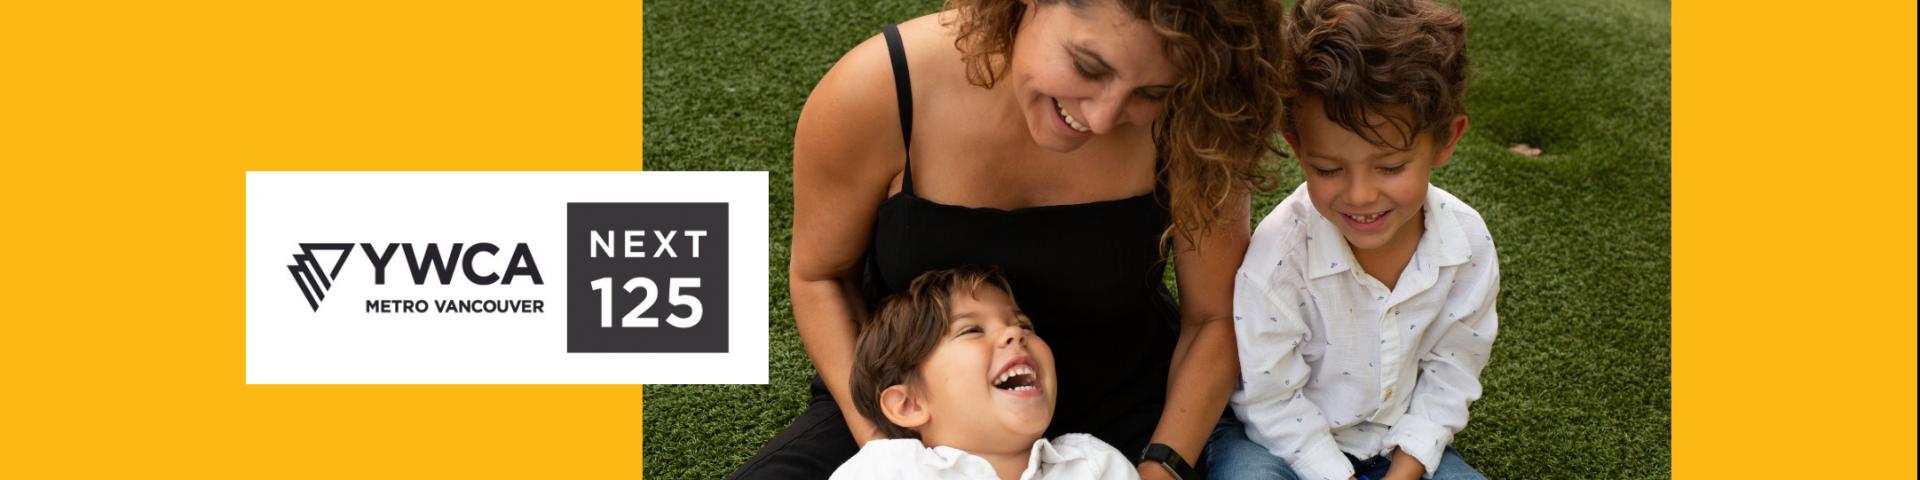 The Next 125 Impact Report Banner. Image showing mom with two young children, smiling. Logo of The Next 125 Campaign and logo of YWCA Metro Vancouver